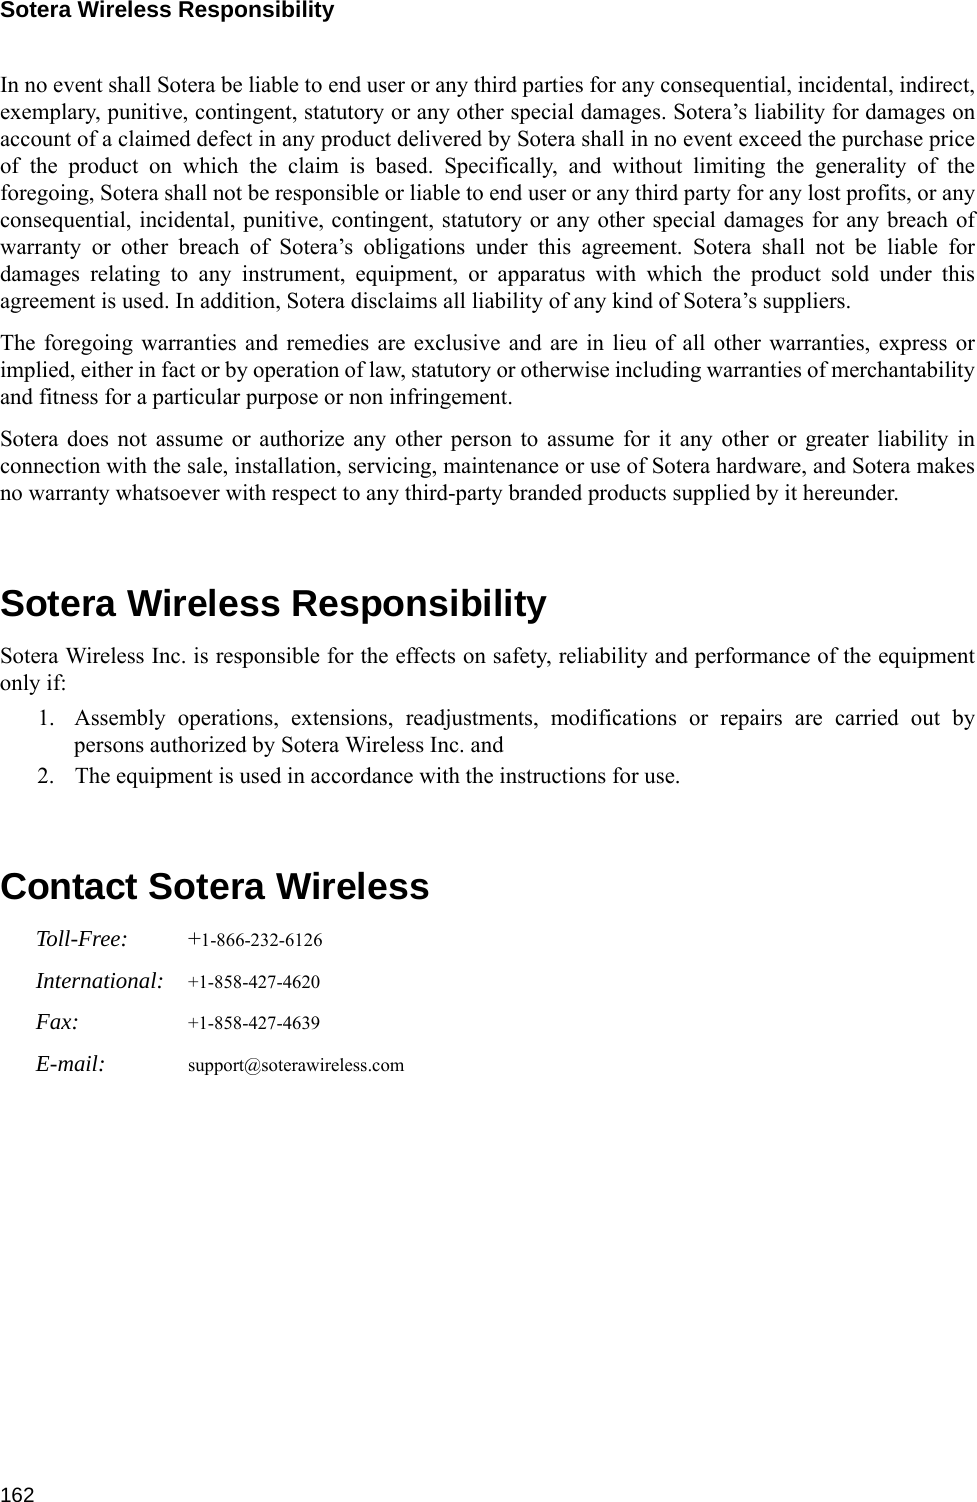 Sotera Wireless Responsibility 162In no event shall Sotera be liable to end user or any third parties for any consequential, incidental, indirect,exemplary, punitive, contingent, statutory or any other special damages. Sotera’s liability for damages onaccount of a claimed defect in any product delivered by Sotera shall in no event exceed the purchase priceof the product on which the claim is based. Specifically, and without limiting the generality of theforegoing, Sotera shall not be responsible or liable to end user or any third party for any lost profits, or anyconsequential, incidental, punitive, contingent, statutory or any other special damages for any breach ofwarranty or other breach of Sotera’s obligations under this agreement. Sotera shall not be liable fordamages relating to any instrument, equipment, or apparatus with which the product sold under thisagreement is used. In addition, Sotera disclaims all liability of any kind of Sotera’s suppliers.The foregoing warranties and remedies are exclusive and are in lieu of all other warranties, express orimplied, either in fact or by operation of law, statutory or otherwise including warranties of merchantabilityand fitness for a particular purpose or non infringement. Sotera does not assume or authorize any other person to assume for it any other or greater liability inconnection with the sale, installation, servicing, maintenance or use of Sotera hardware, and Sotera makesno warranty whatsoever with respect to any third-party branded products supplied by it hereunder.Sotera Wireless ResponsibilitySotera Wireless Inc. is responsible for the effects on safety, reliability and performance of the equipmentonly if:1. Assembly operations, extensions, readjustments, modifications or repairs are carried out bypersons authorized by Sotera Wireless Inc. and2. The equipment is used in accordance with the instructions for use.Contact Sotera WirelessToll-Free: +1-866-232-6126International: +1-858-427-4620Fax: +1-858-427-4639E-mail: support@soterawireless.com